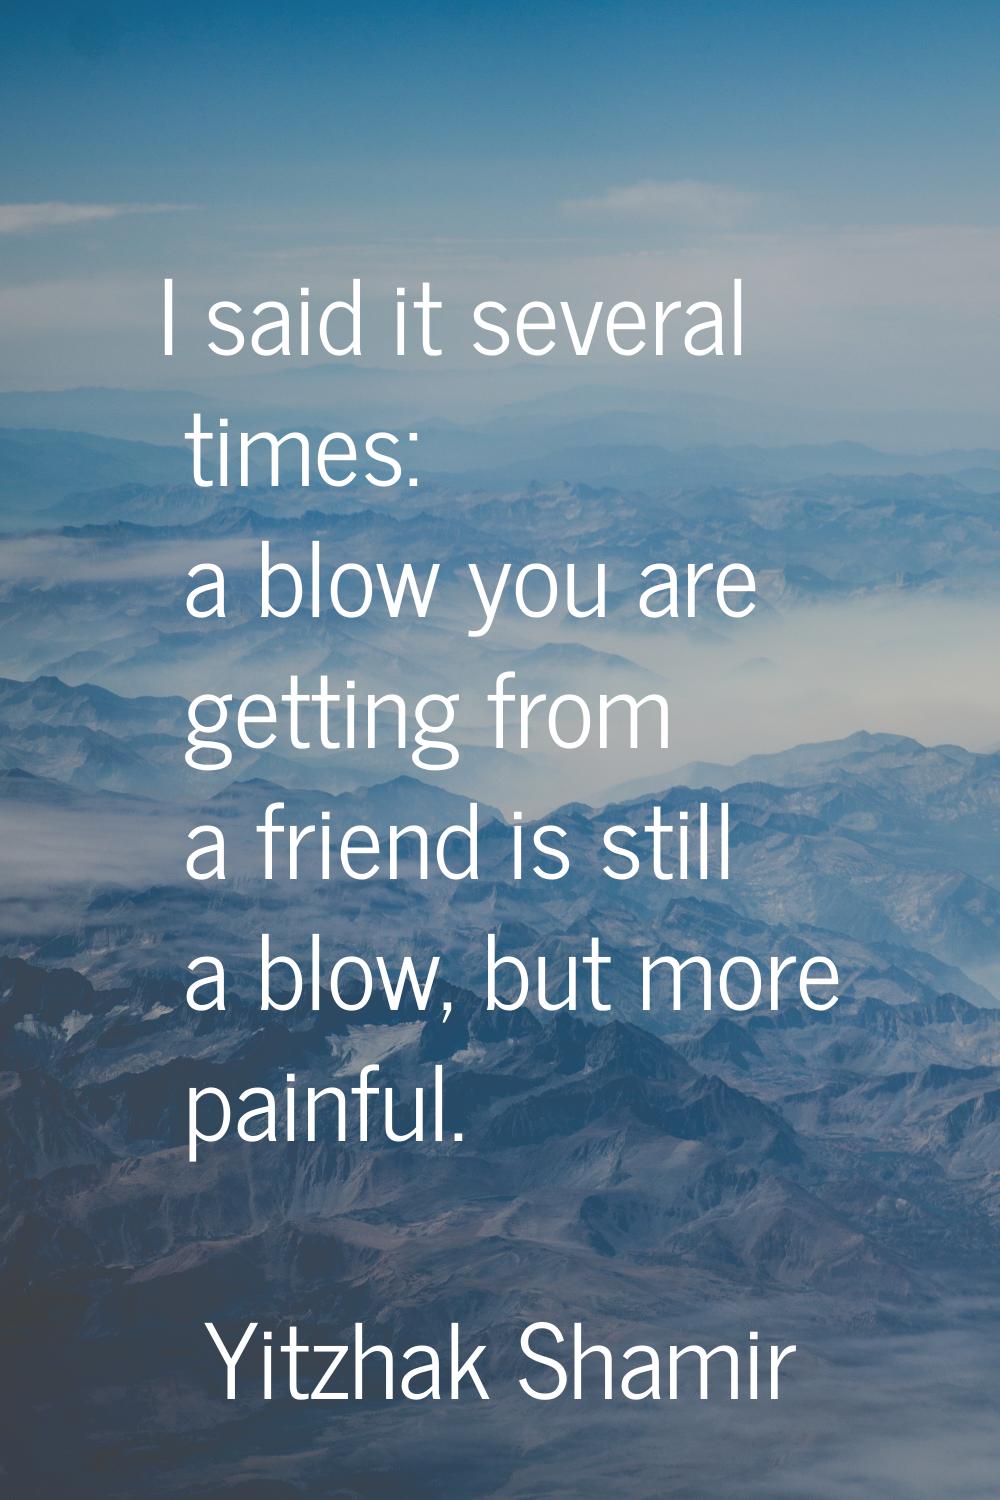 I said it several times: a blow you are getting from a friend is still a blow, but more painful.